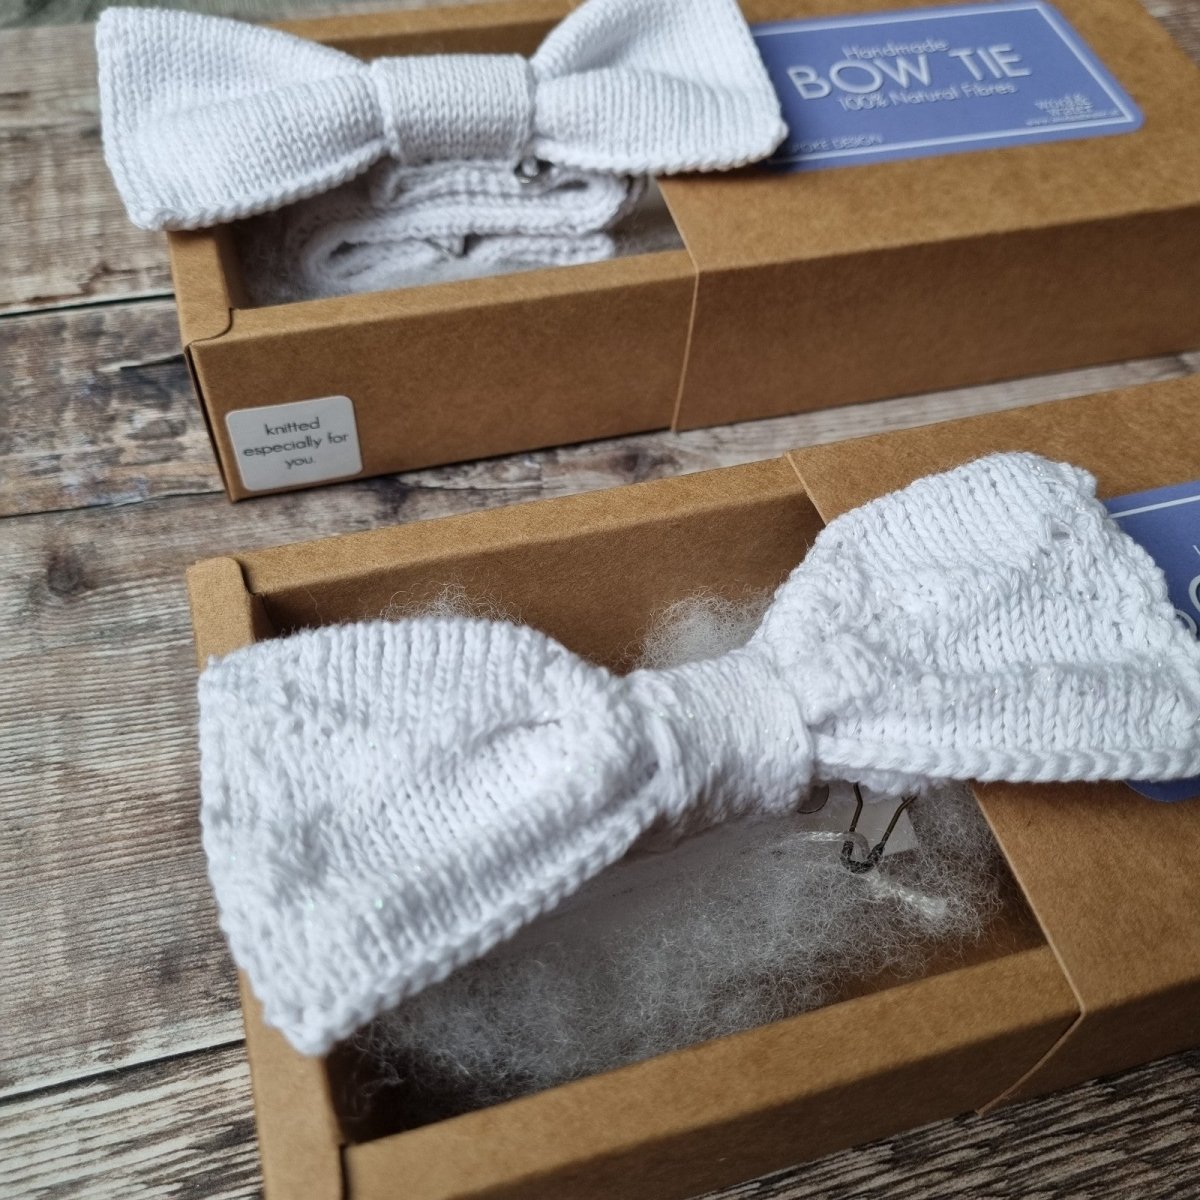 Custom Bow Tie Designs for J. Willgoose Esq of Public Service Broadcasting - Wool & Water